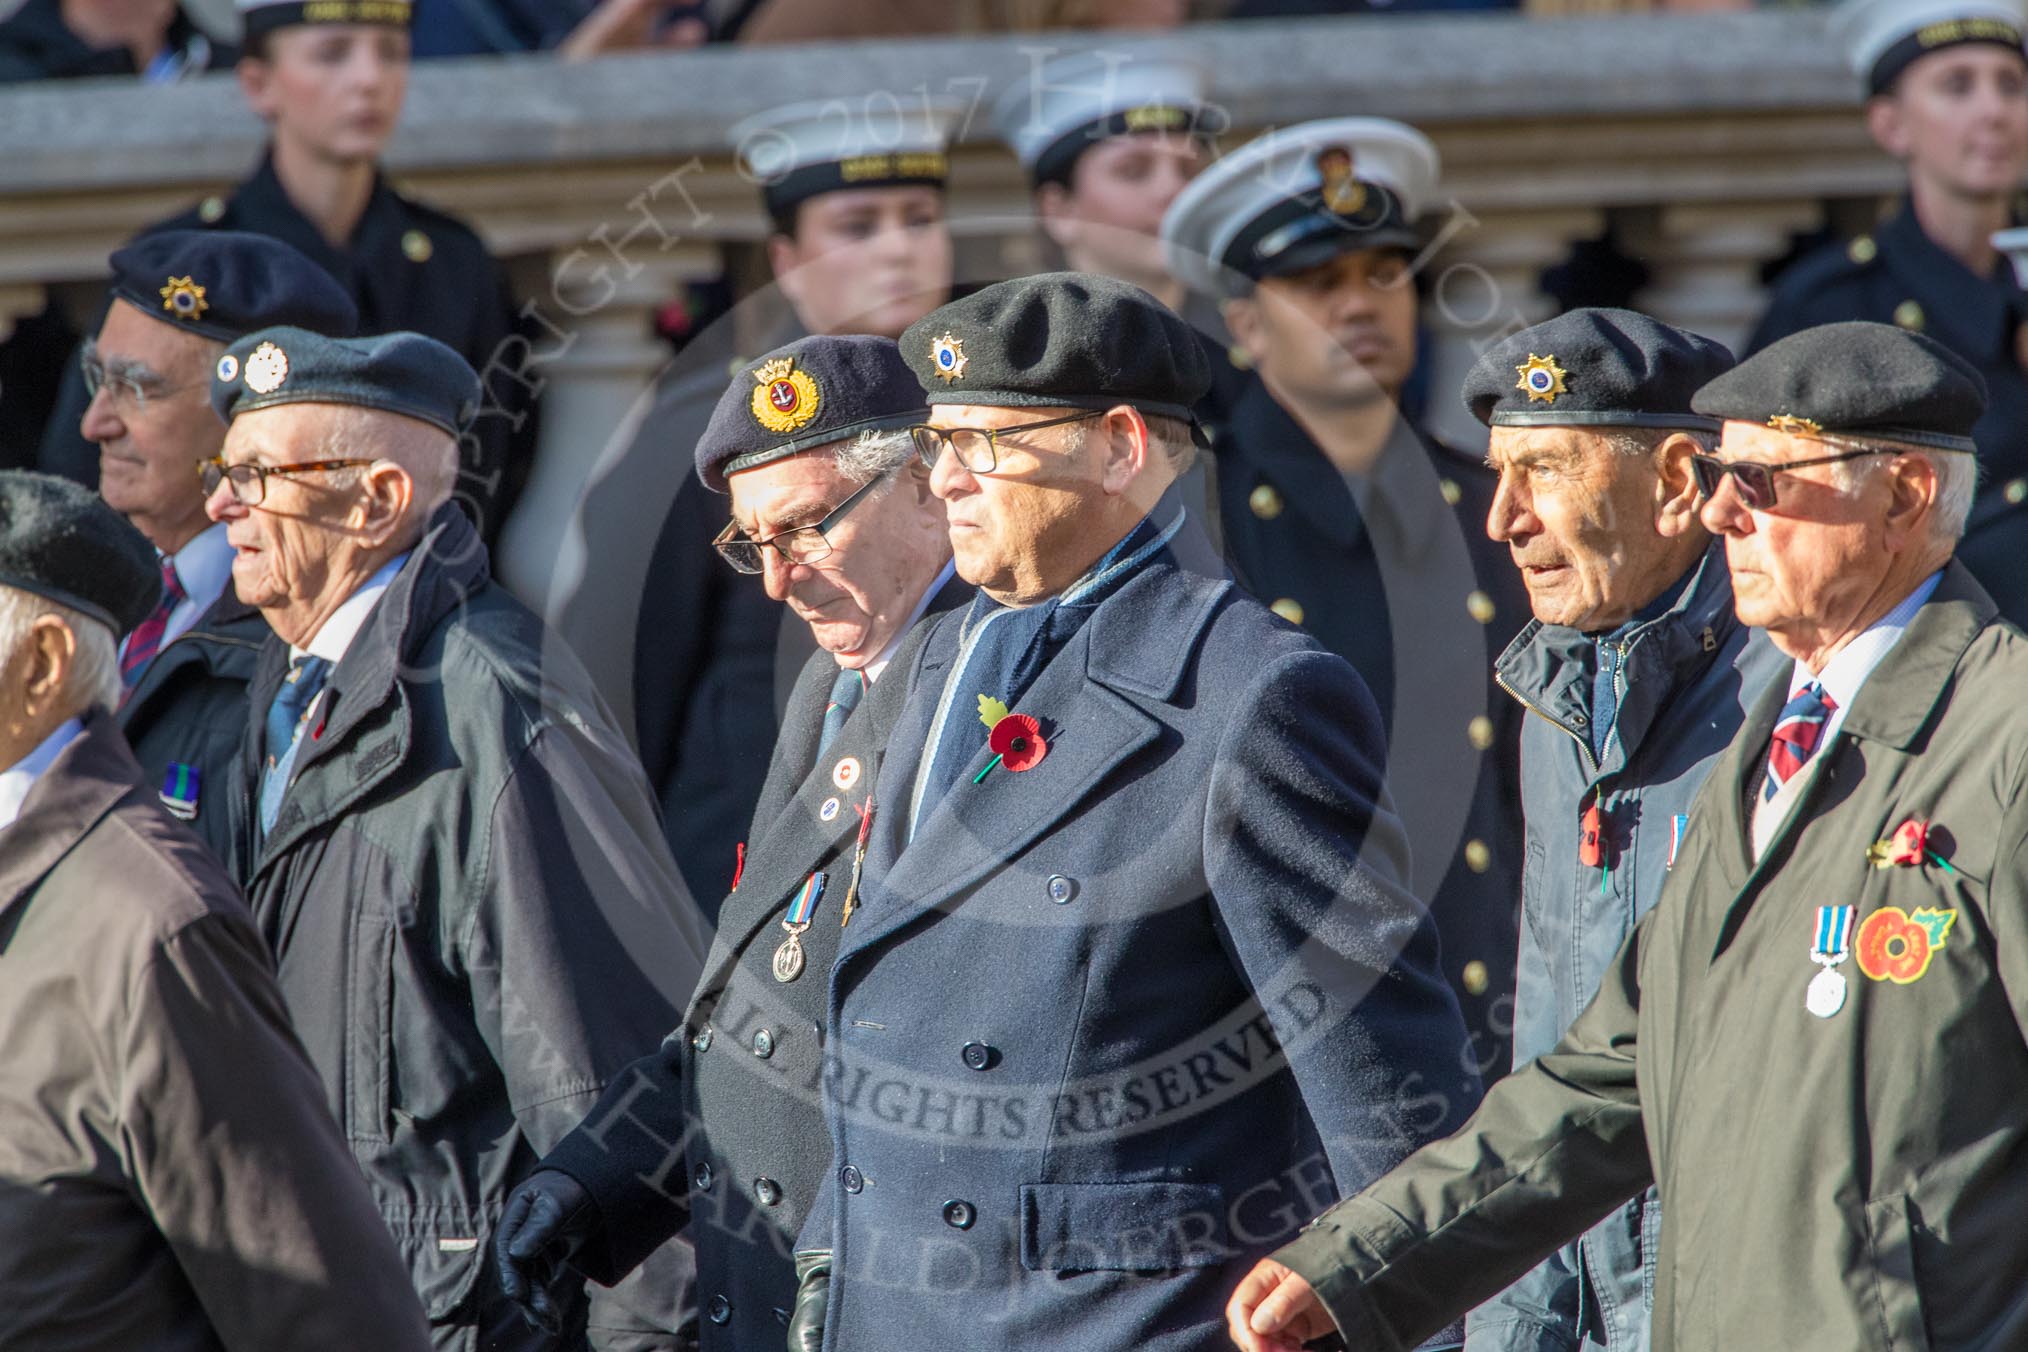 Association  of Jewish Ex-Servicemen and Women (Group D4, 27 members) during the Royal British Legion March Past on Remembrance Sunday at the Cenotaph, Whitehall, Westminster, London, 11 November 2018, 12:21.